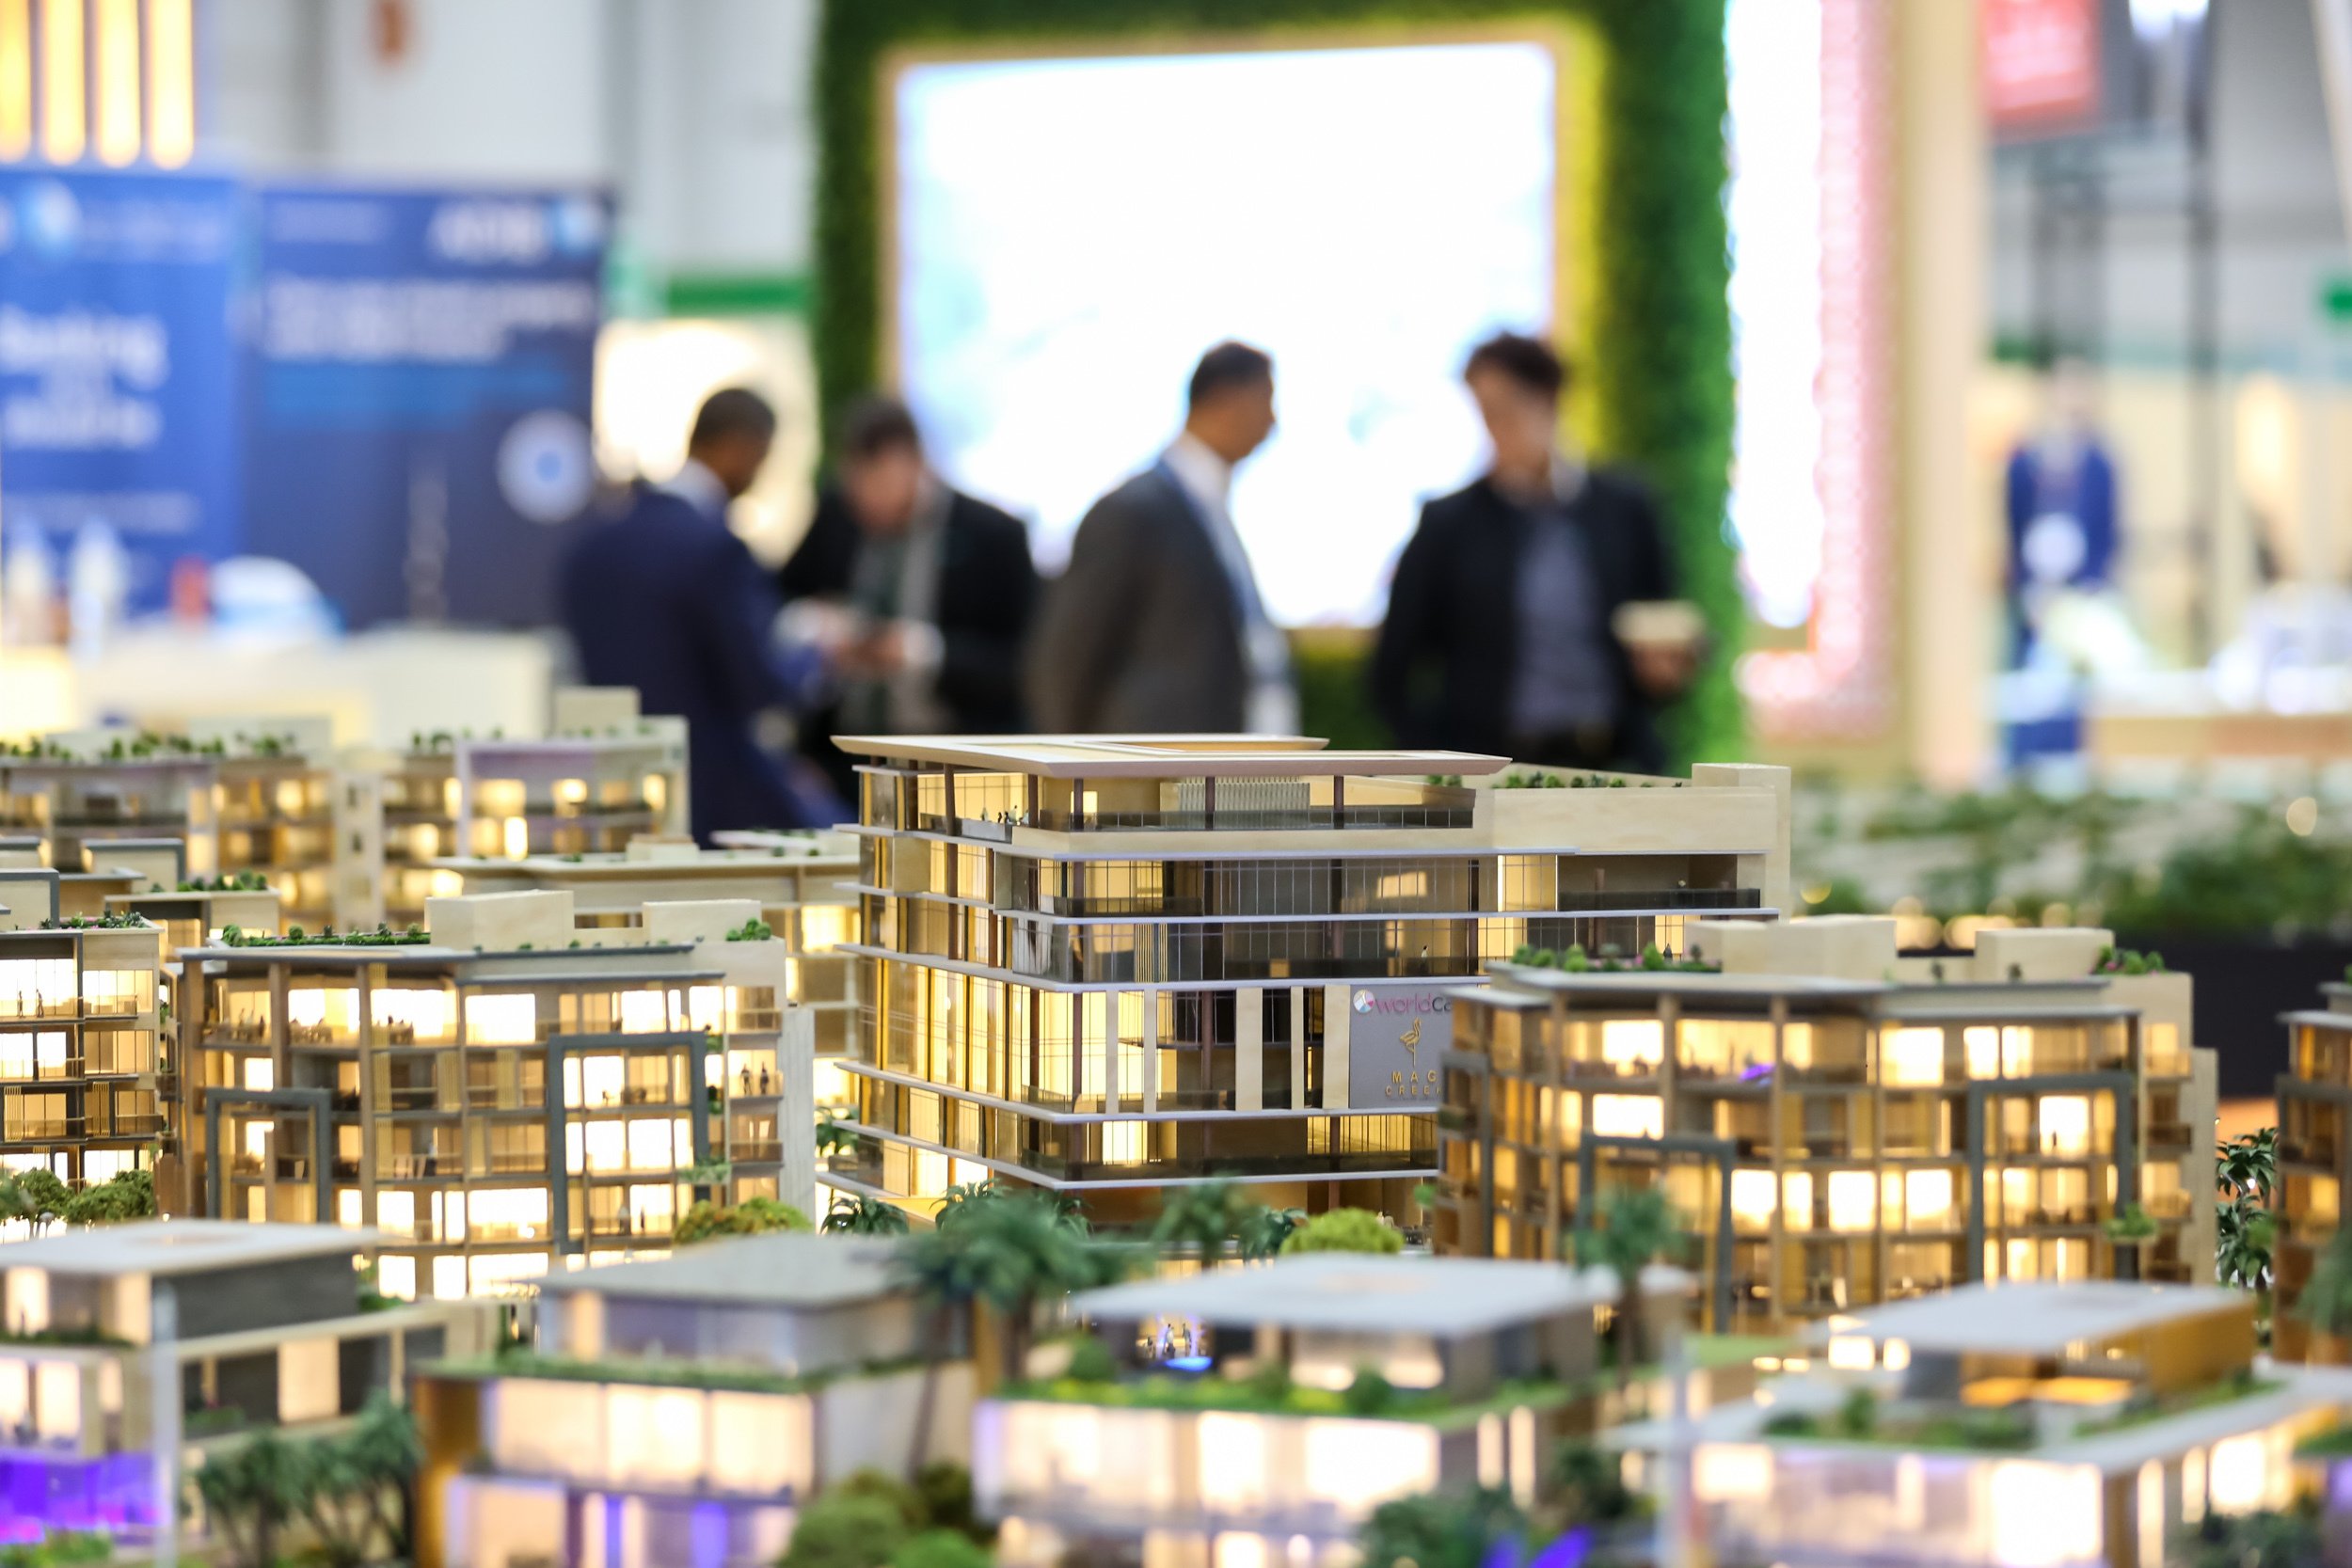 An architectural model of some buildings at the Abu Dhabi Convention and Exhibition Bureau